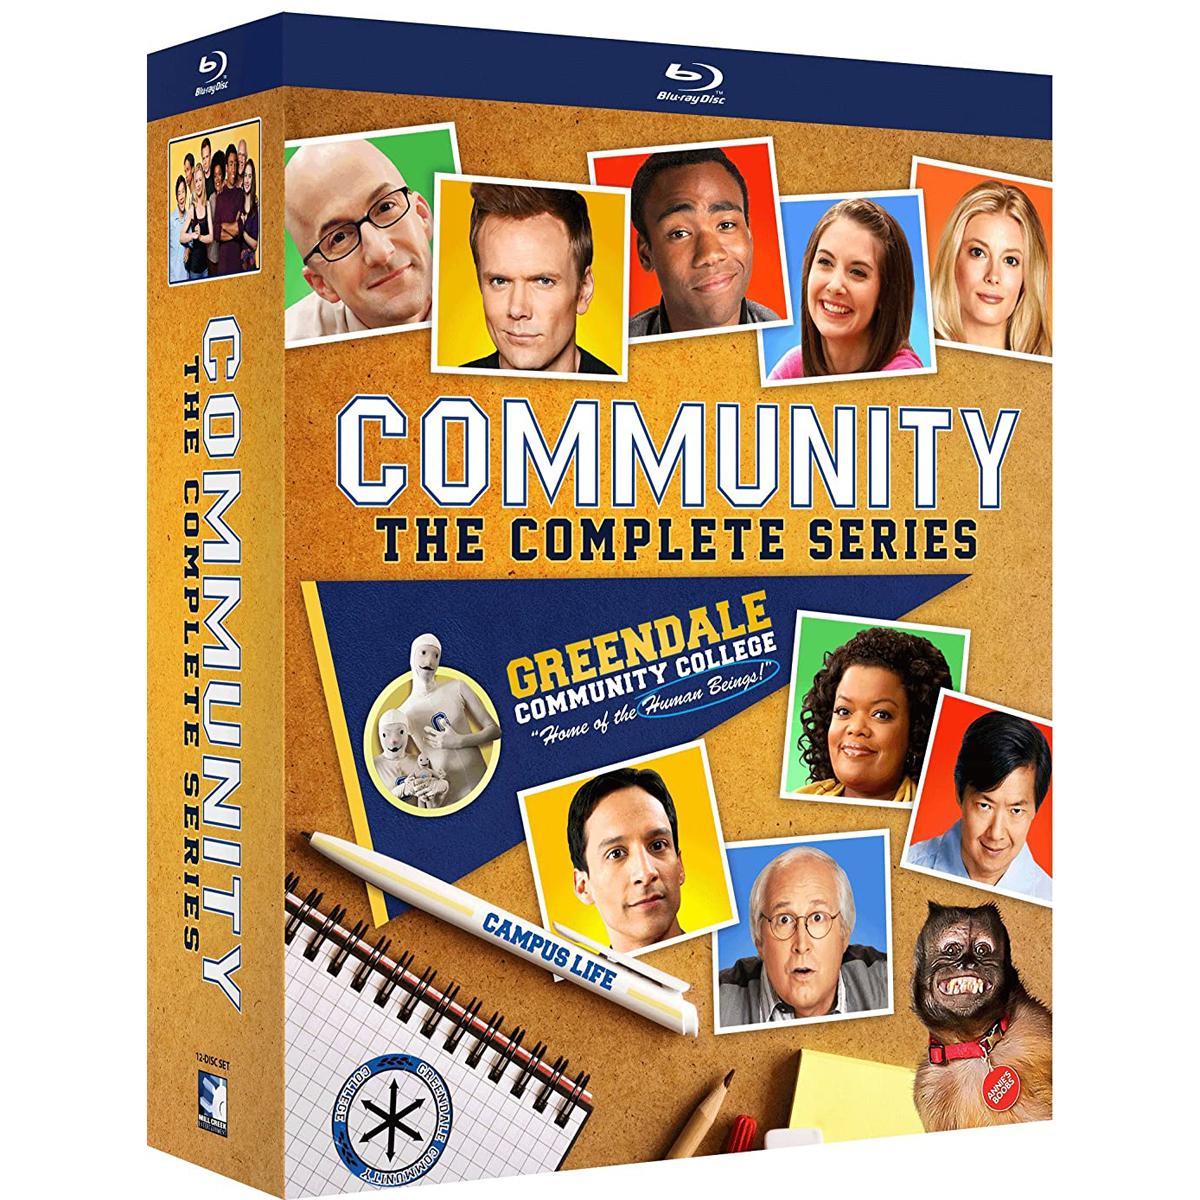 Community The Complete Series Blu-ray for $34.96